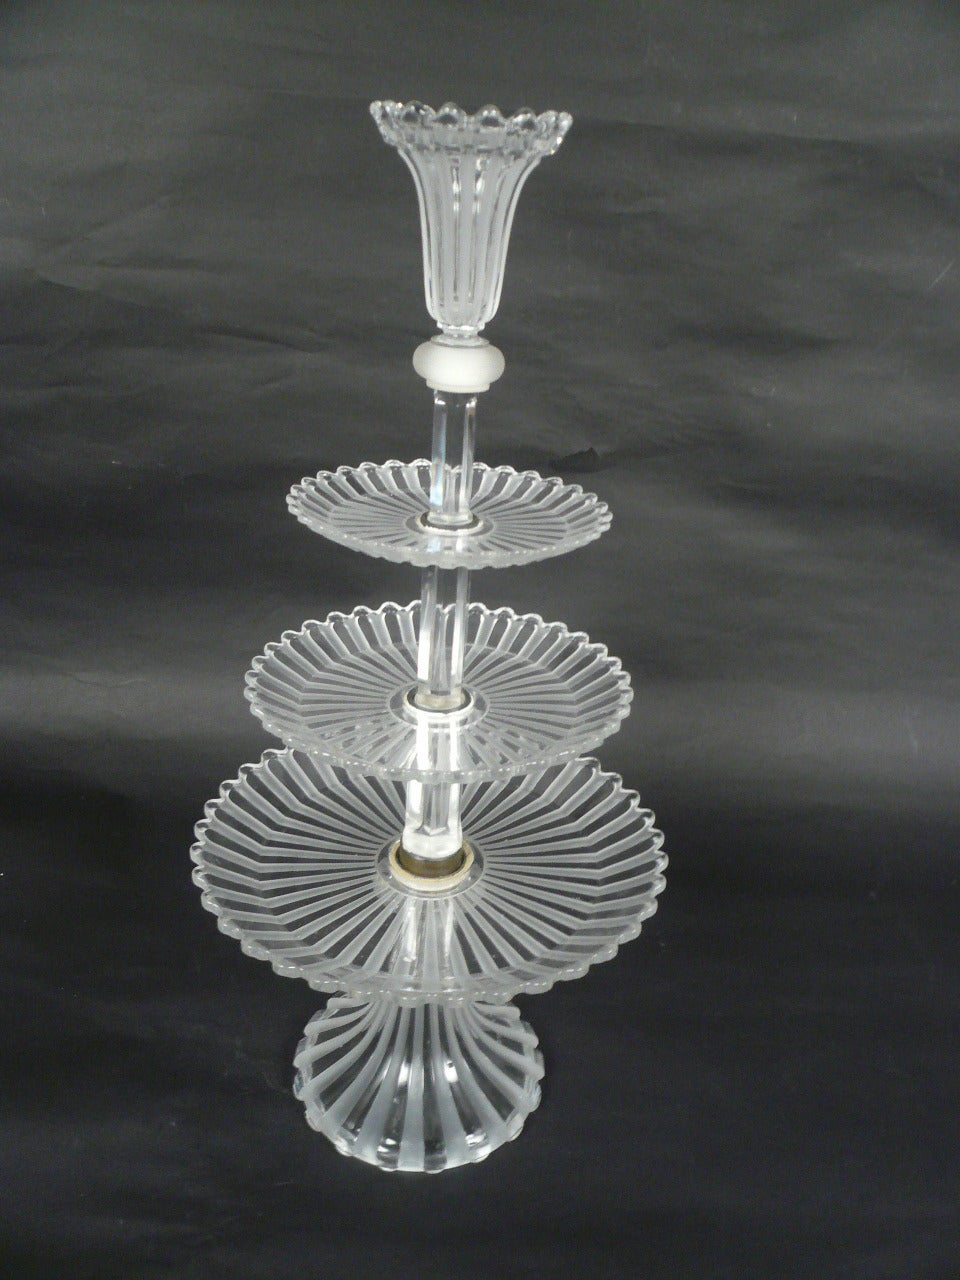 A signed Baccarat moulded, and frosted glass three tiered pastry stand.
The three graduated tiers are surmounted by a 4